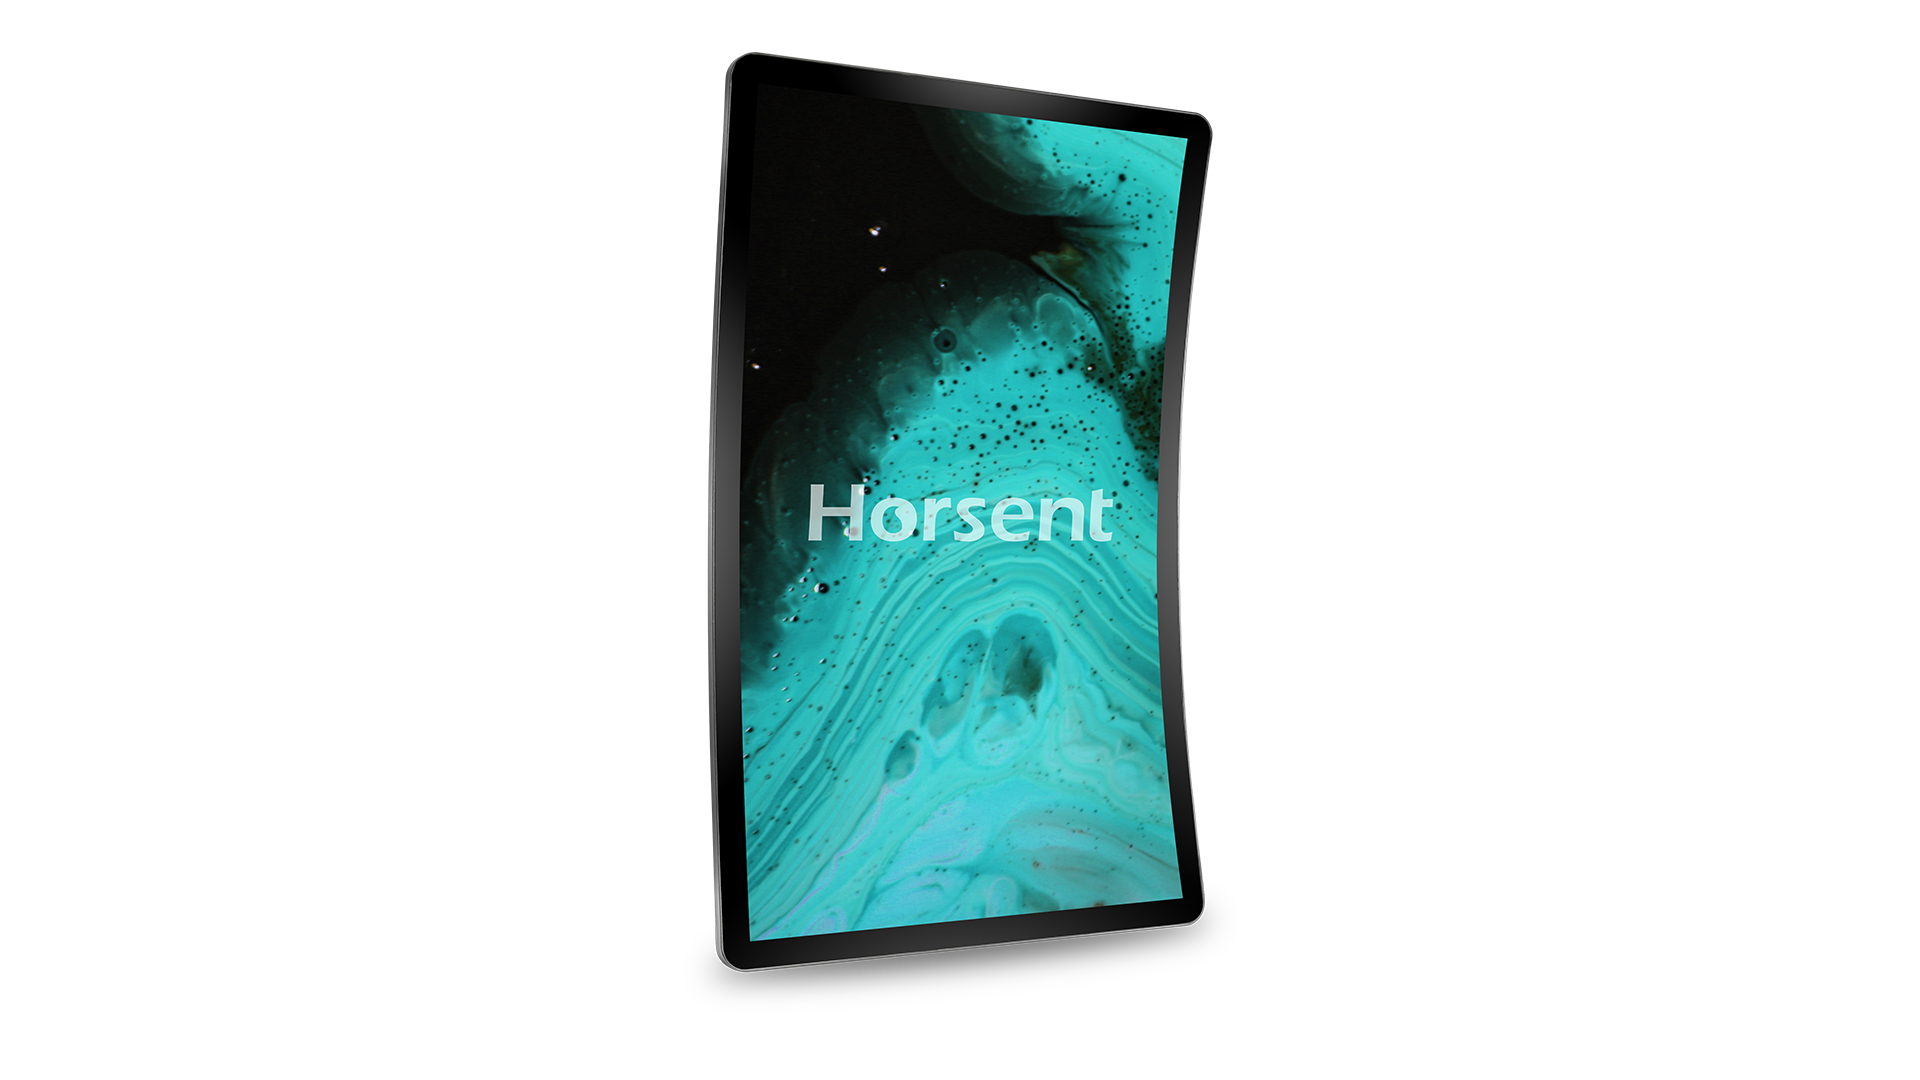 Come and meet Horsent Curved touchscreen monitor